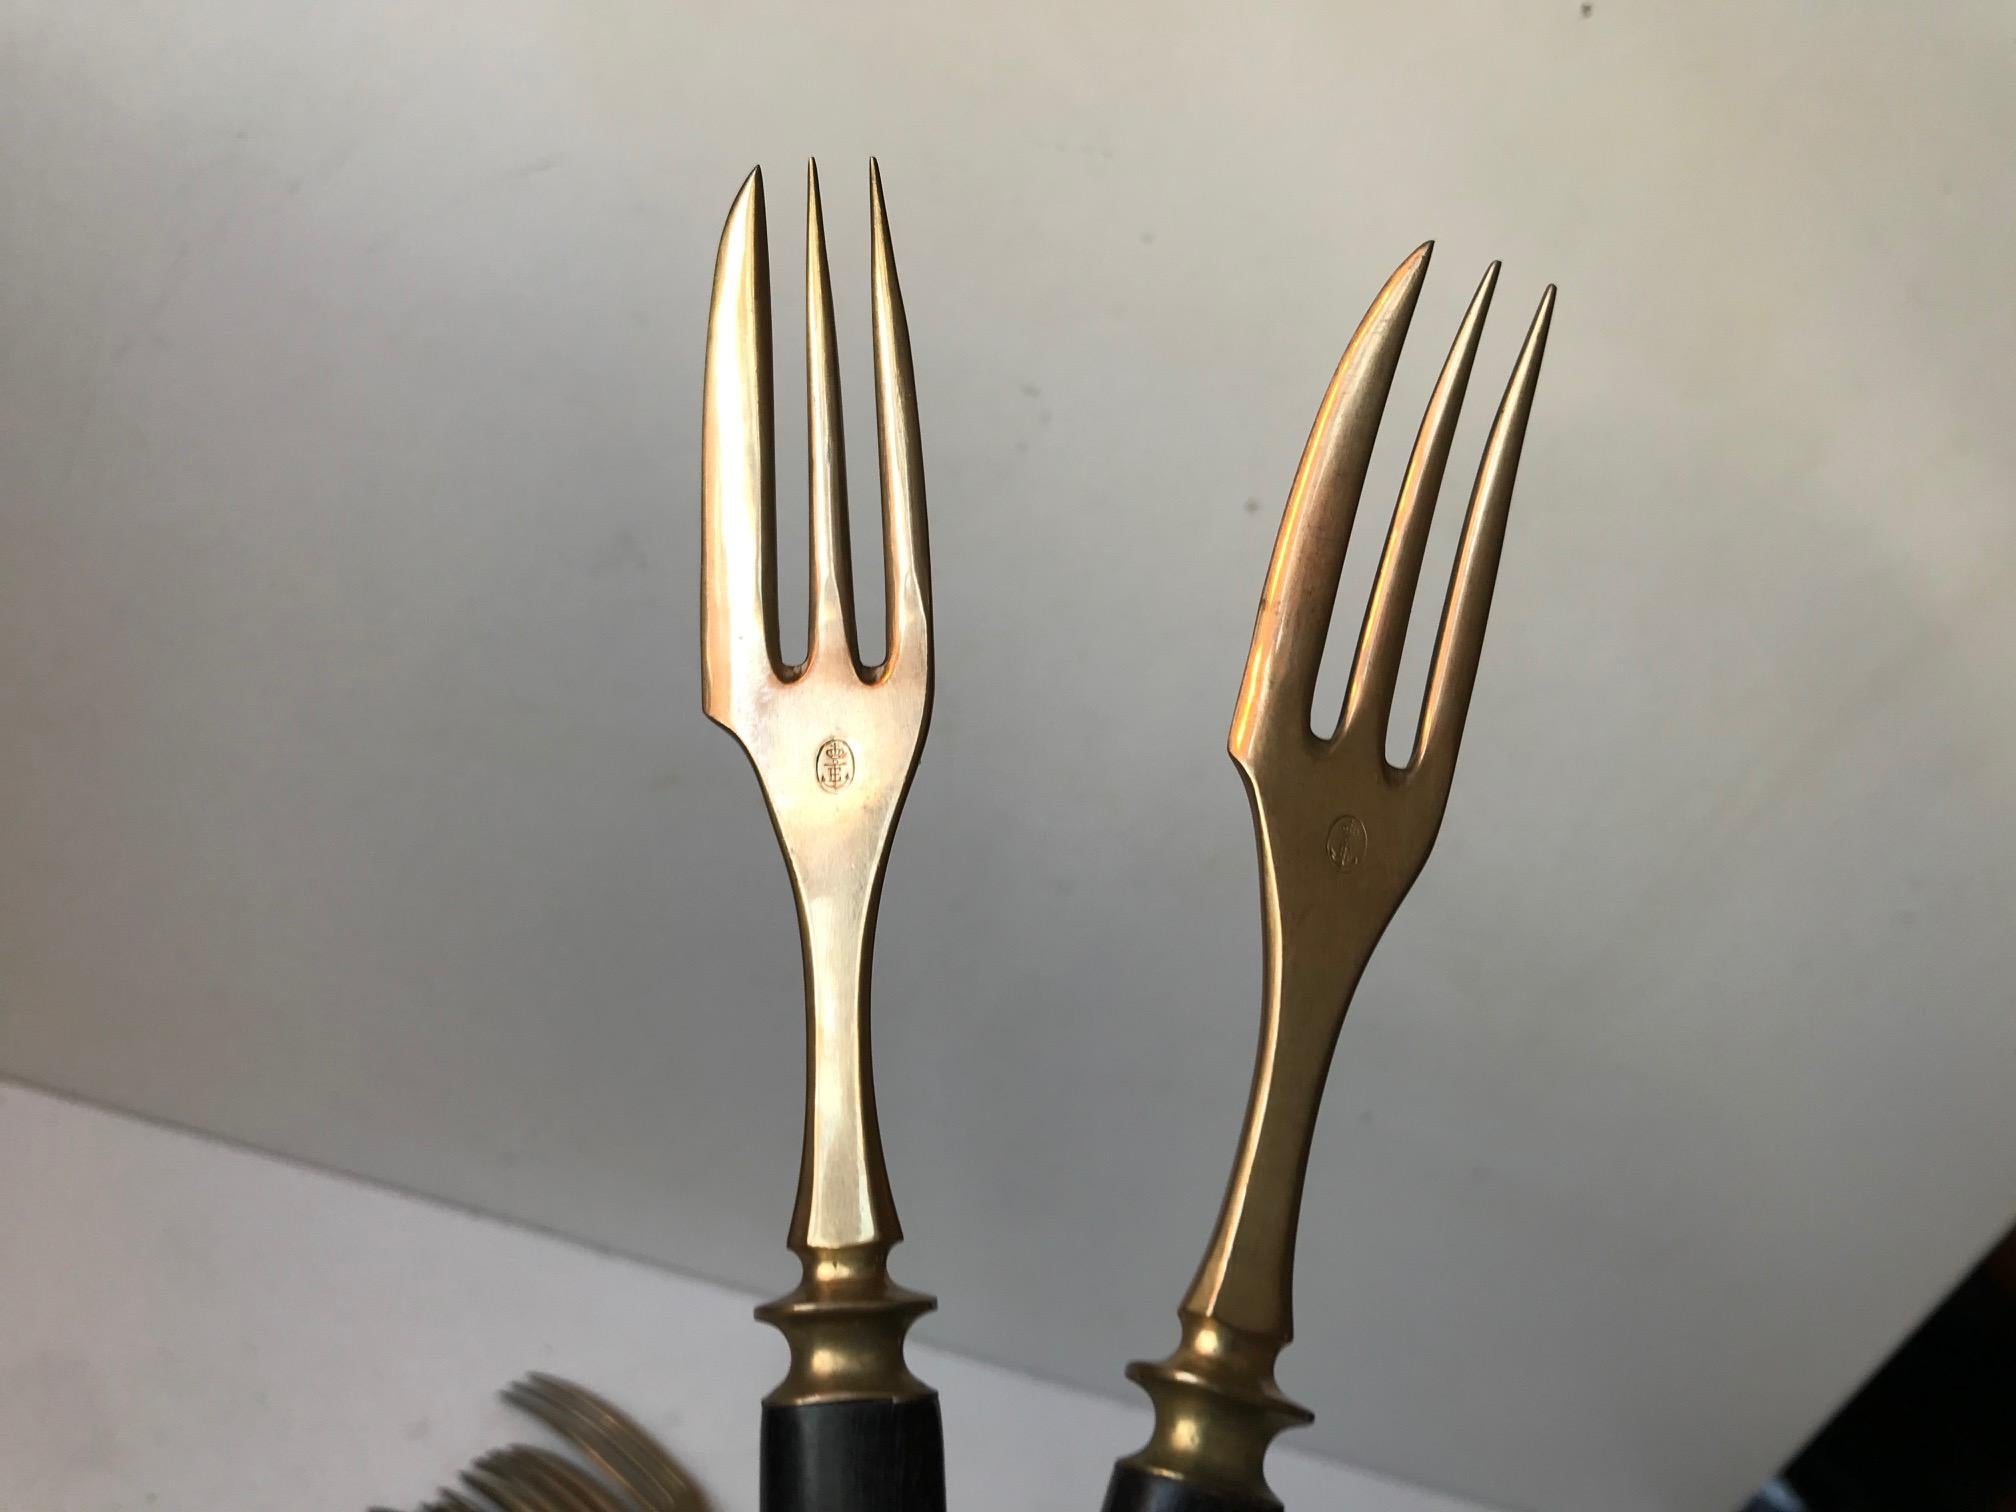 Rare complete set of so-called fork-knives in brass and black resin. The third spike of the fork doubles as a knife. The original intension was in regards to consuming cake and pastries in style. But they are also rather practical if you are